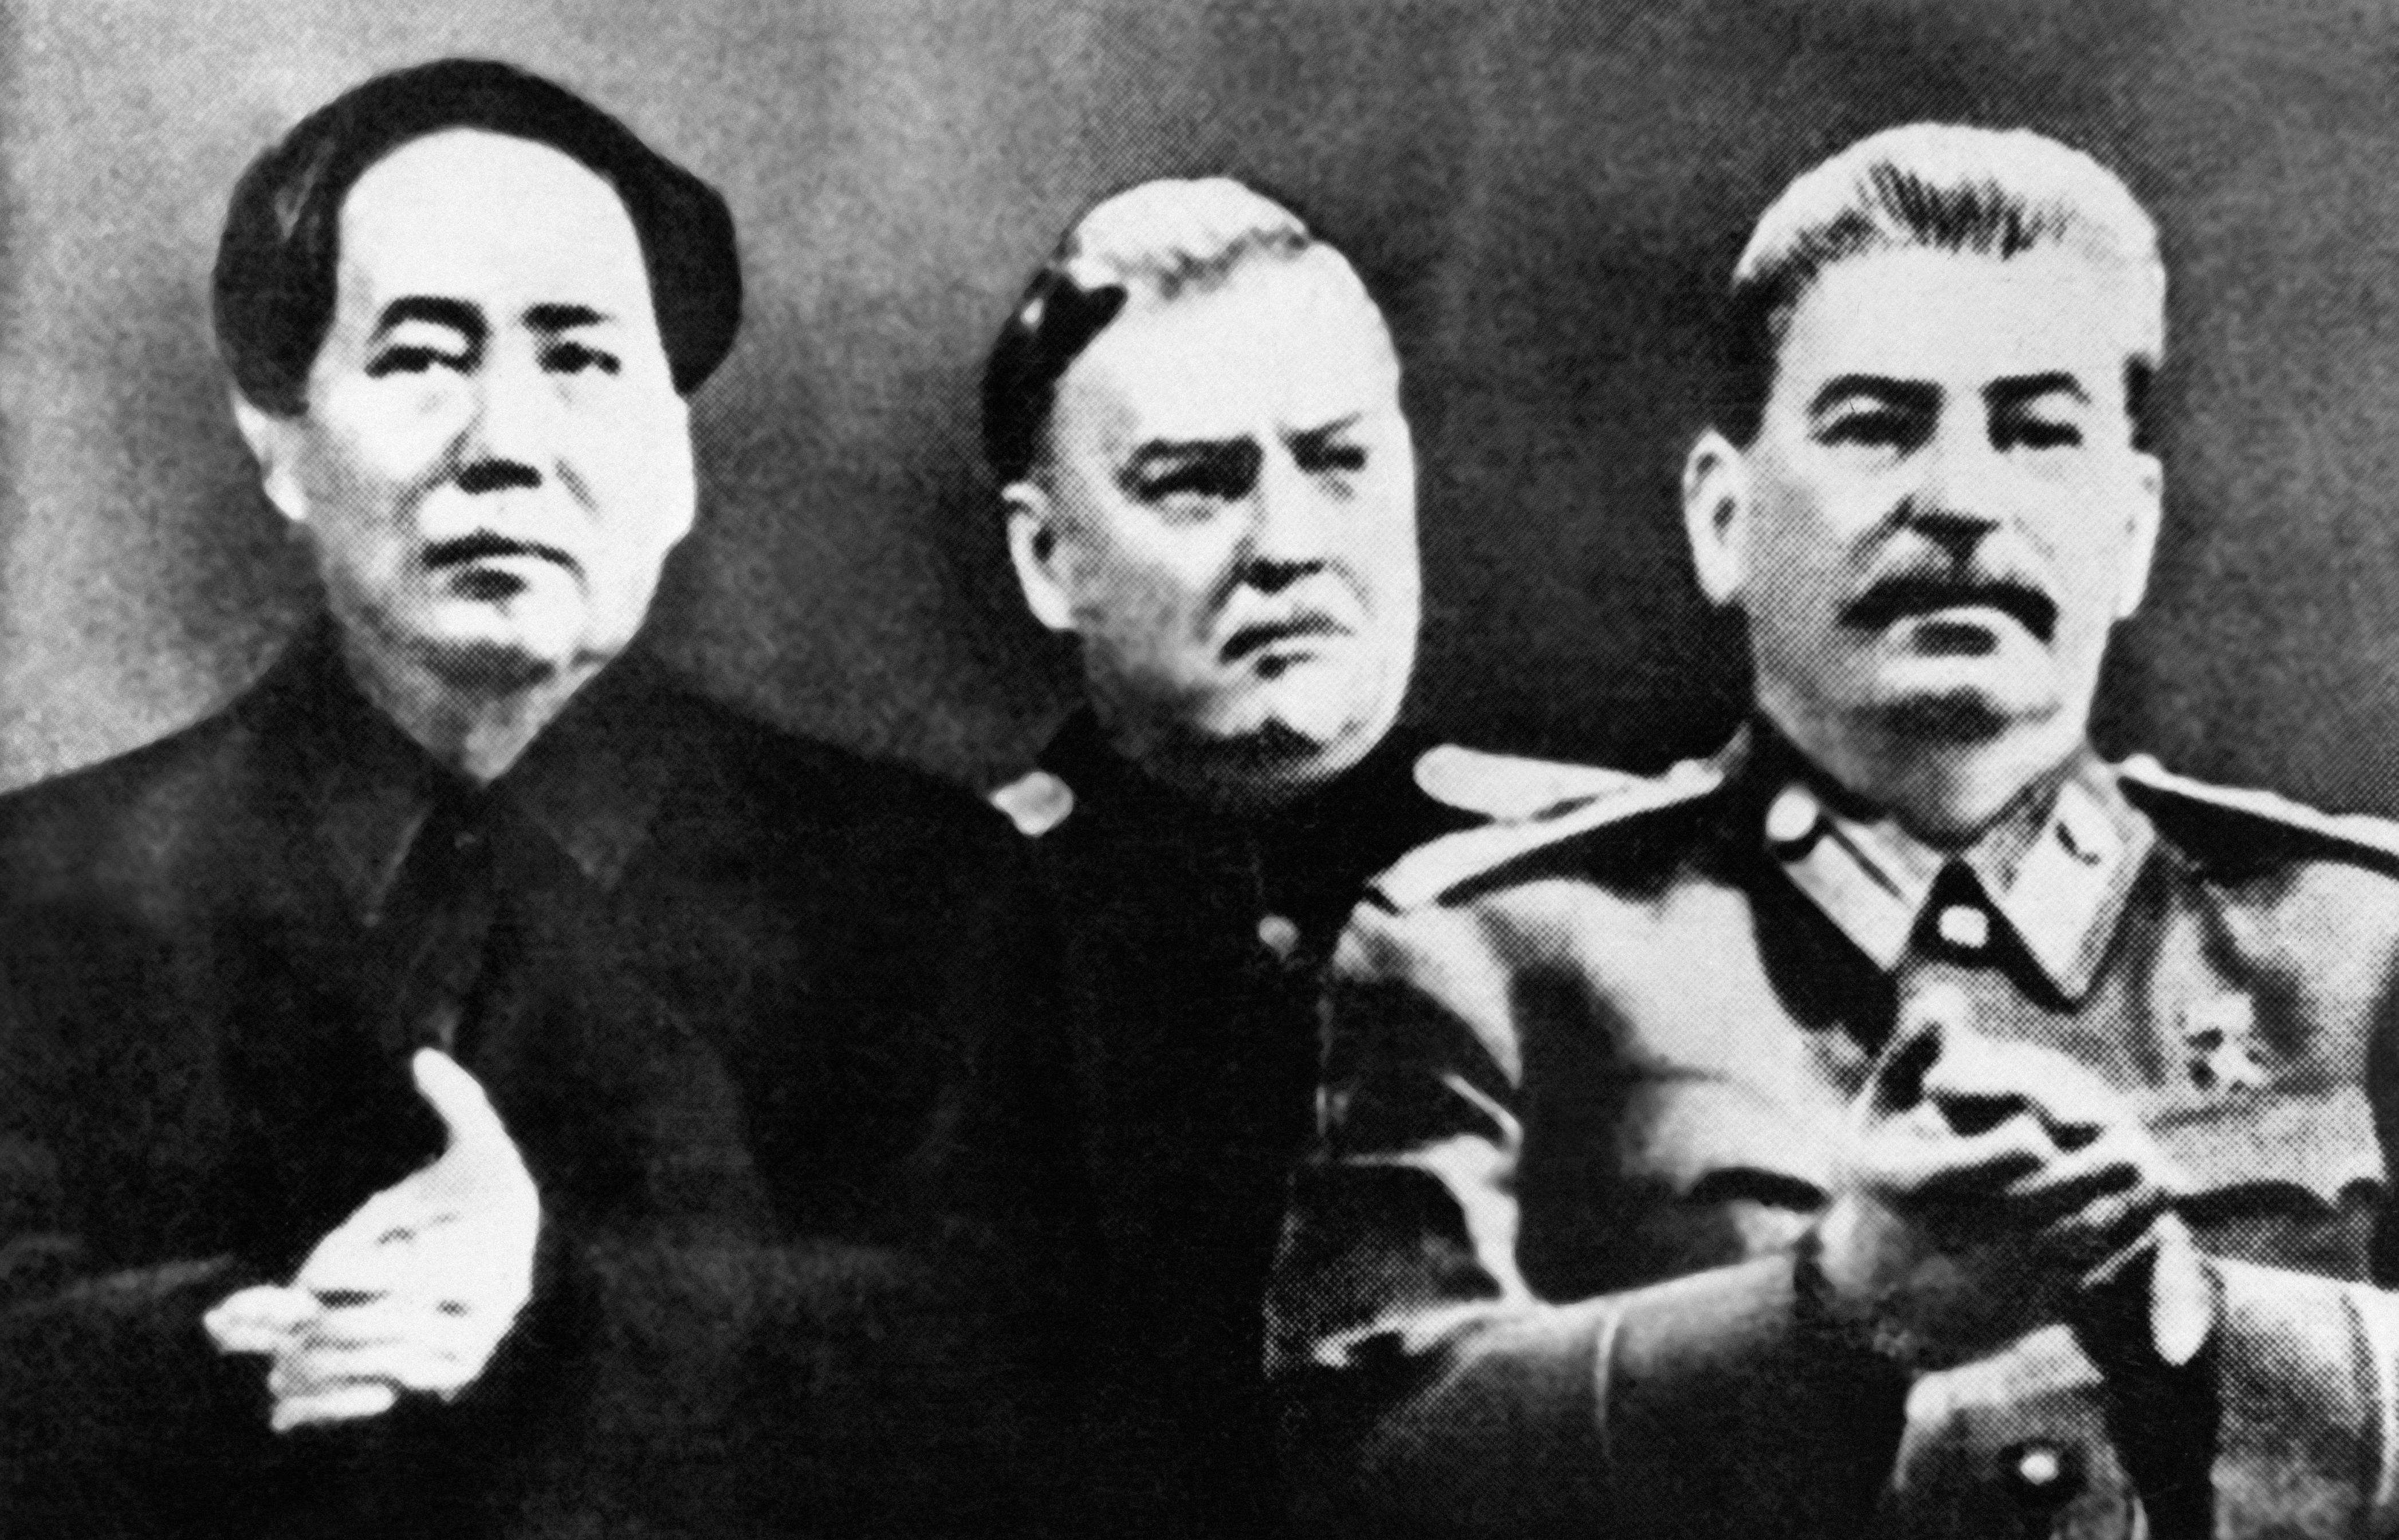 Chinese President Mao Zedong, Deputy Prime Minister of the Soviet Union Nikolai Alexsandrovich Boulganin and Soviet leader Joseph Stalin during the XXIIth Congress of the Communist Party in 1949.